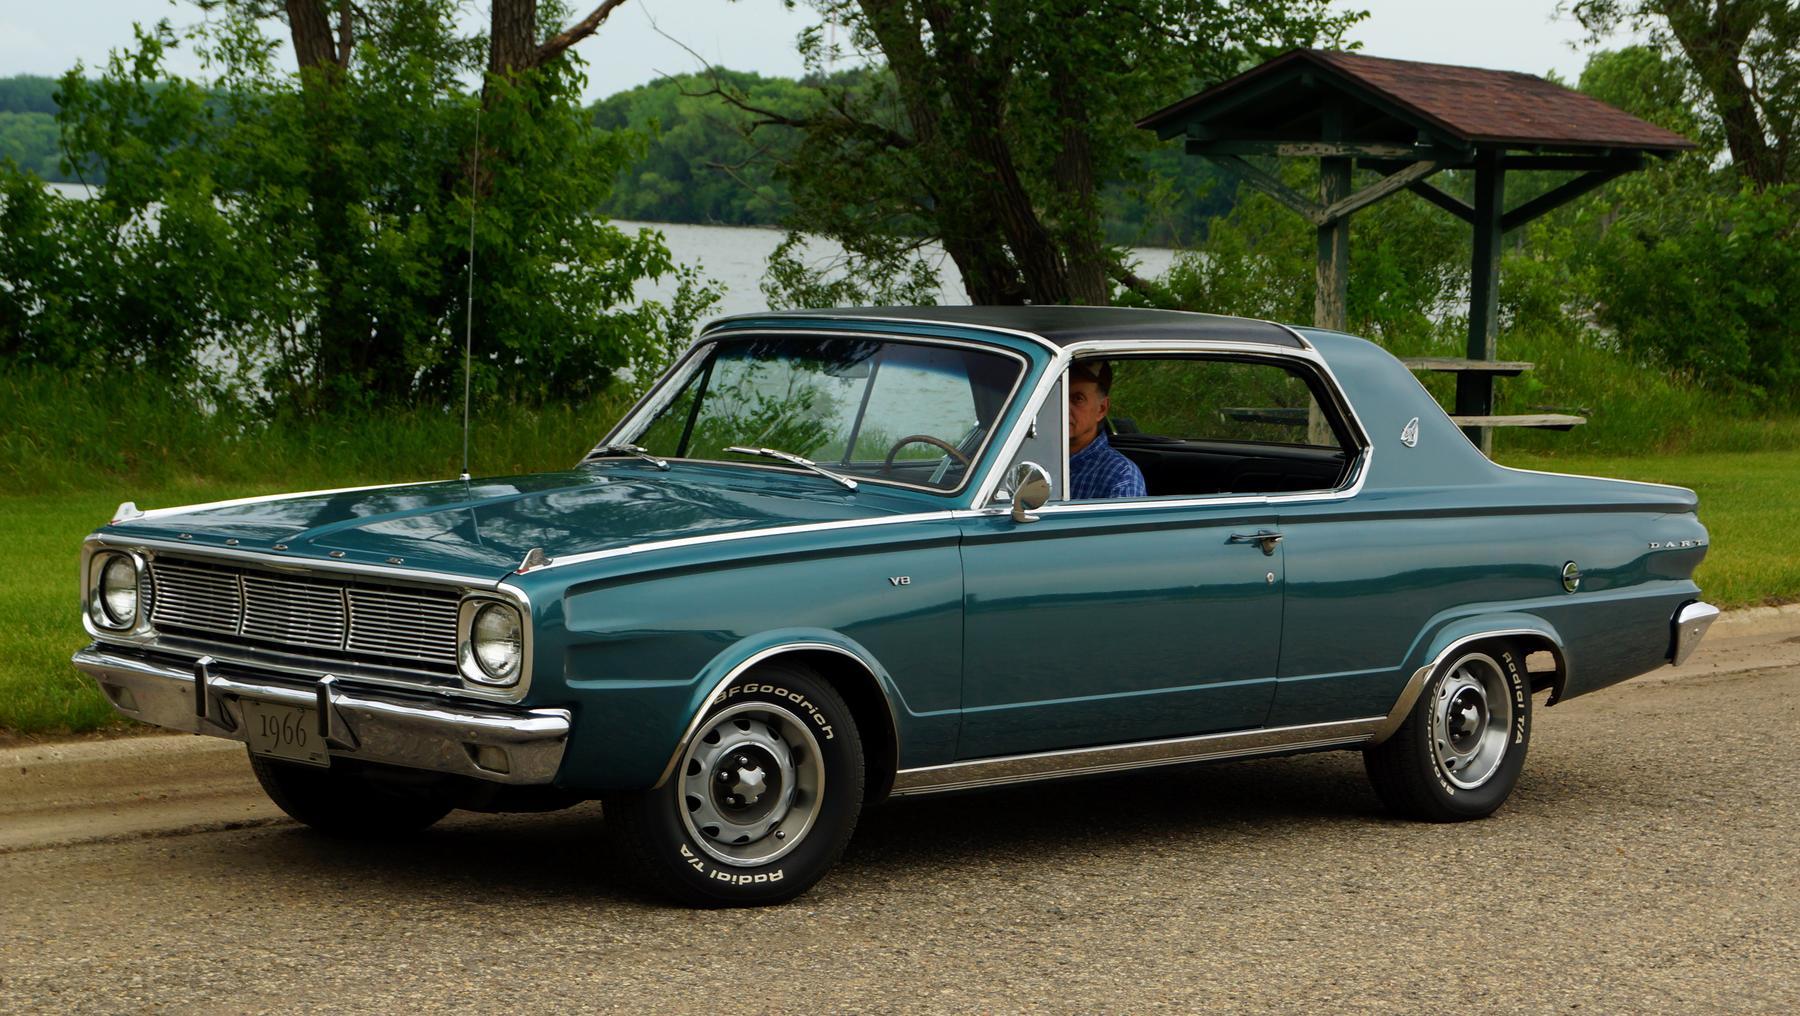 1966 Dodge Dart GT - Image of counselling, Therapy for couples